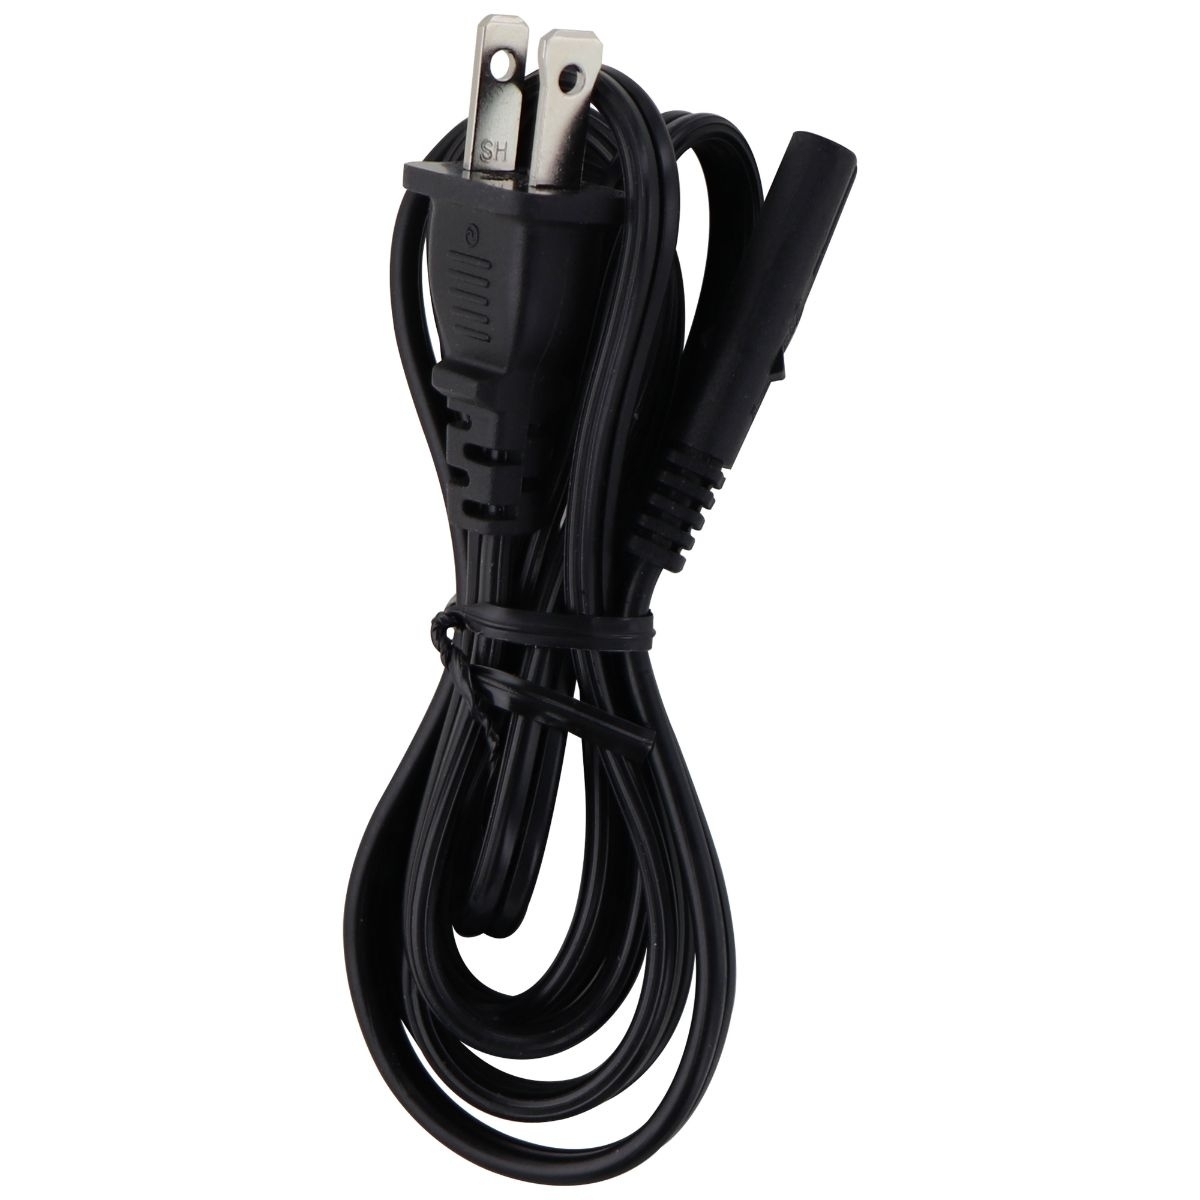 Generic 4 Foot AC Power Cable With TH-218 Connection - 250V / 2.5A - Black (Refurbished)